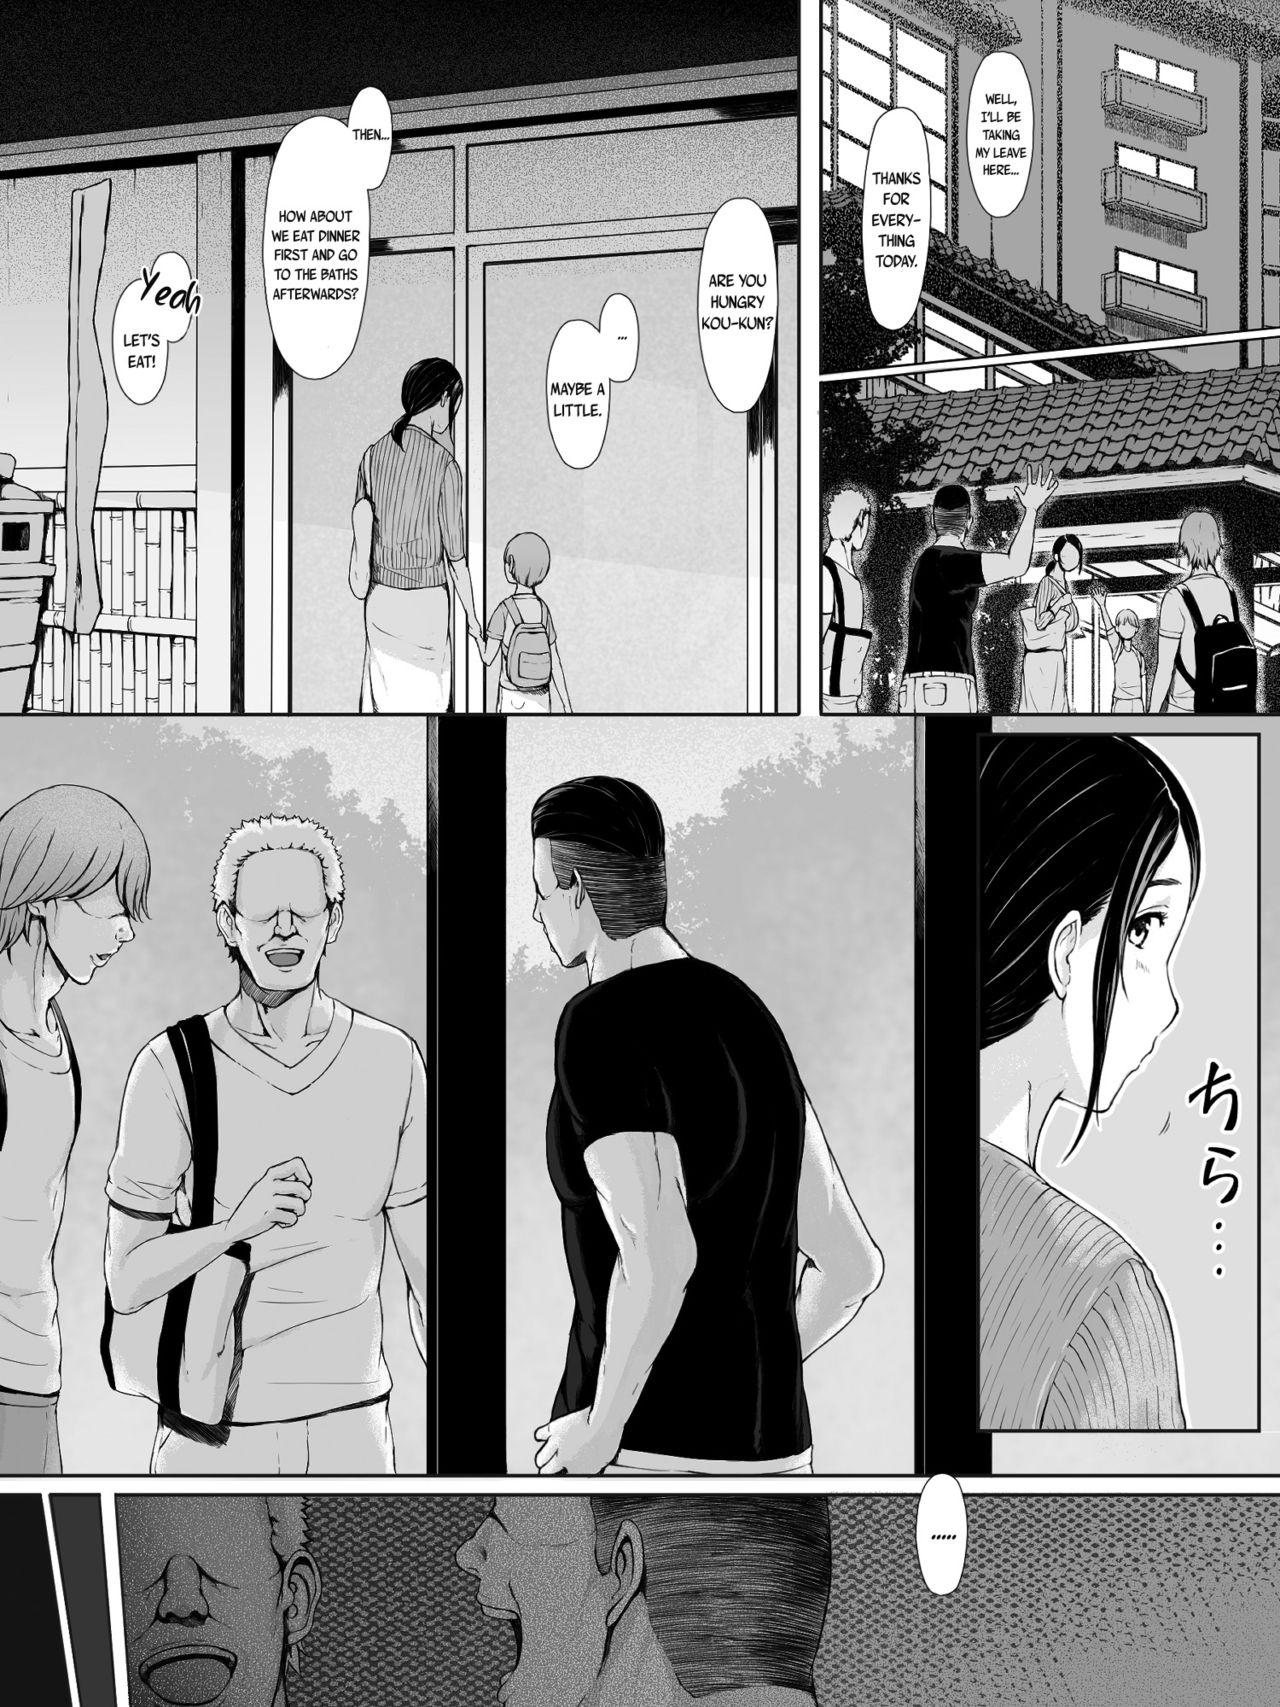 Stroking Hahagui - Original 18 Year Old - Page 11